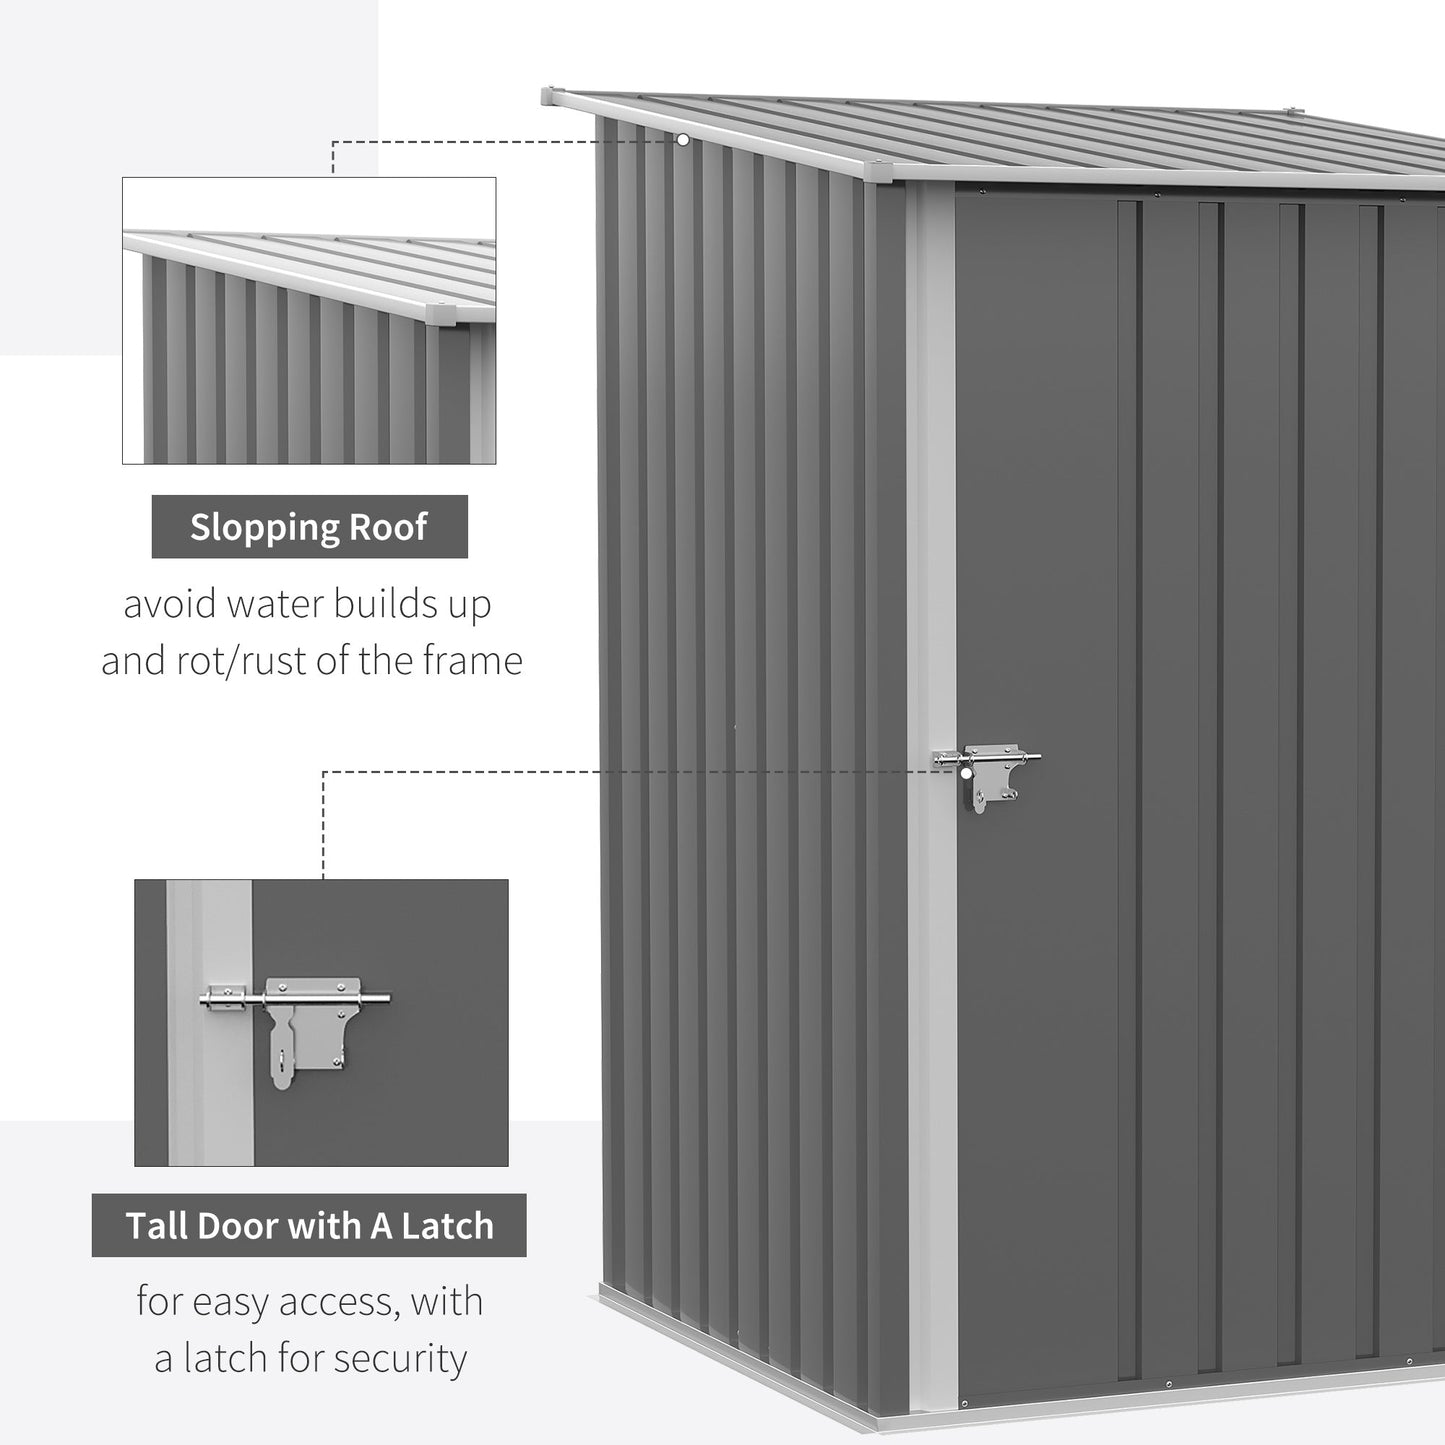 Outdoor and Garden-Outdoor 3.3' x 3.4' Lean-to Garden Storage Shed, Galvanized Steel Tool House with Lockable Door for Patio, Gray - Outdoor Style Company